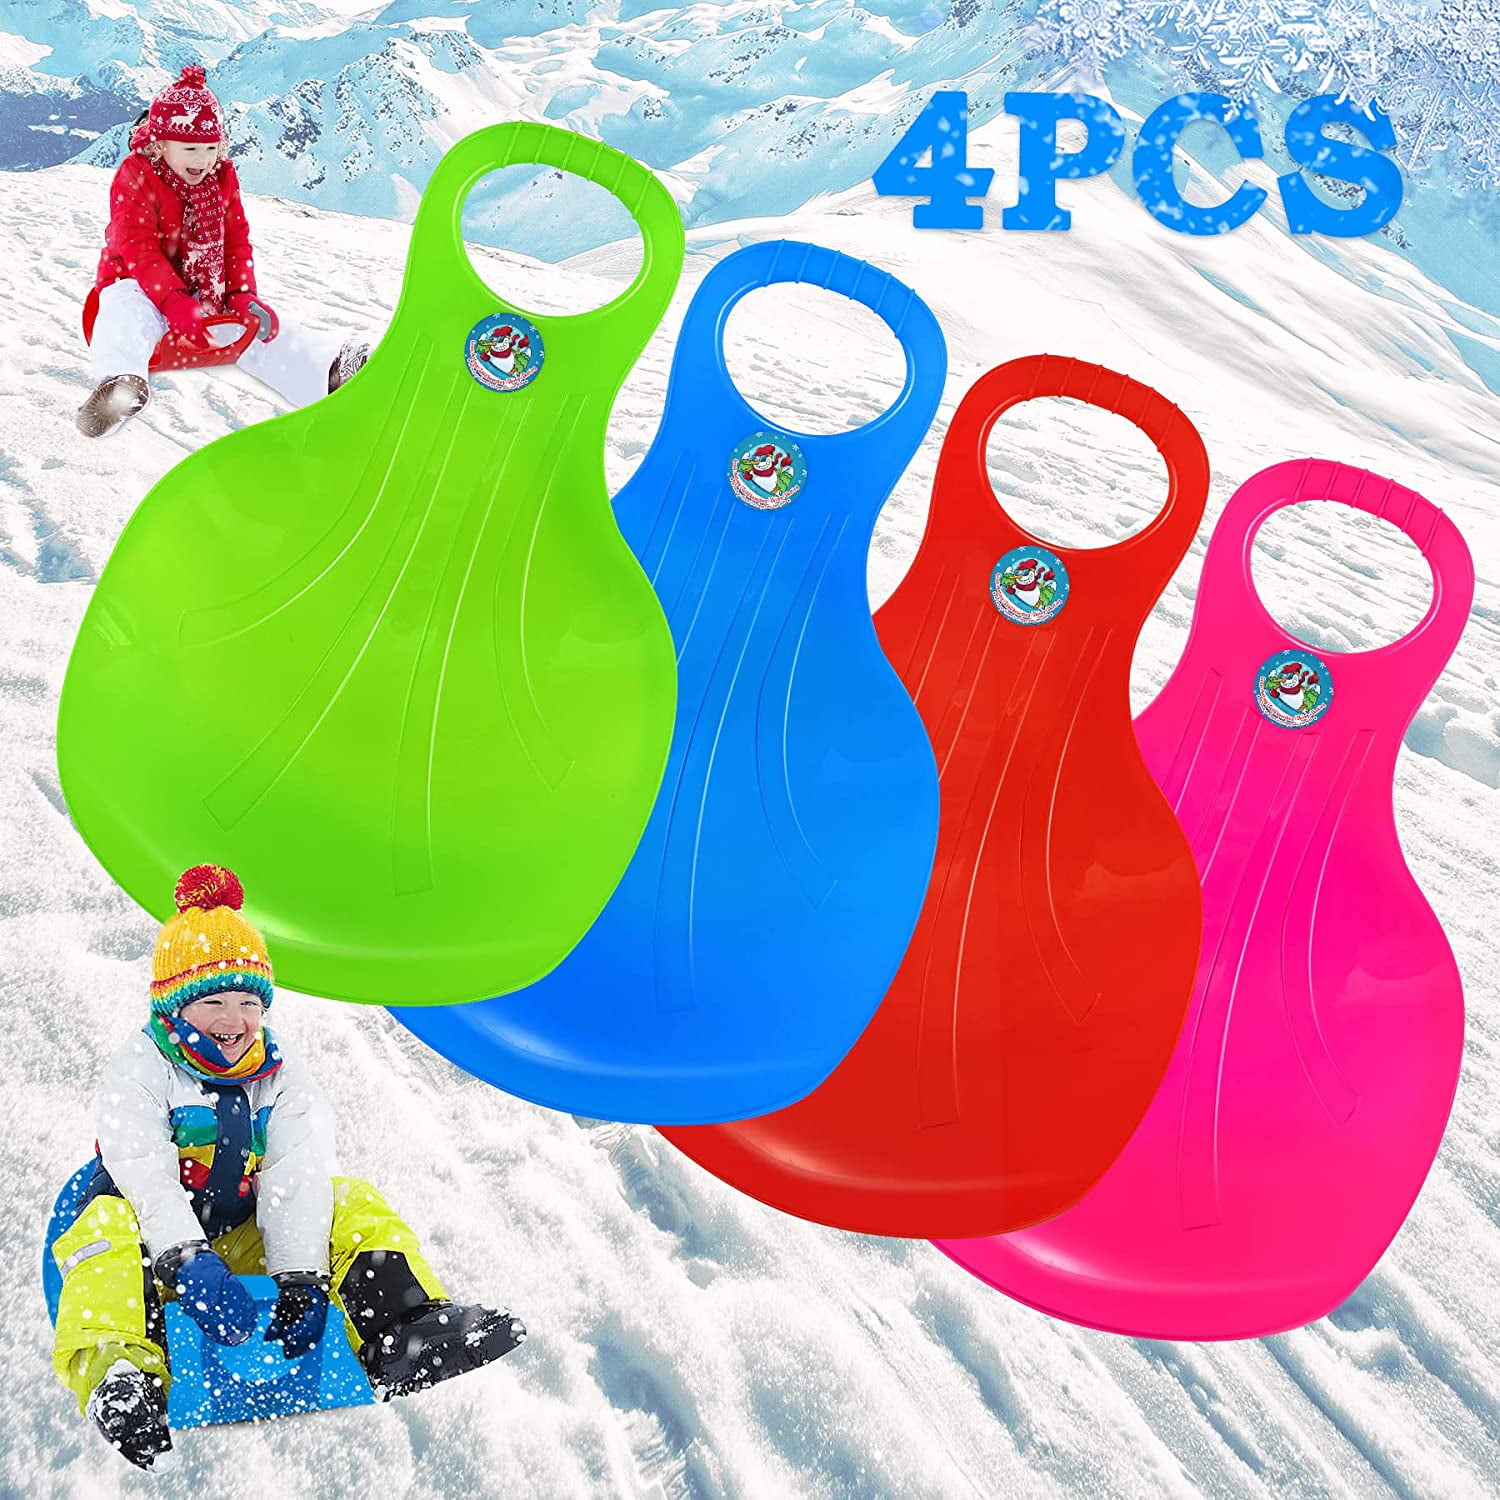 Snow Sled Portable Thicken Kids Adult Snow Sled Sledge Ski Board Sleigh Outdoor Grass Sand Slider Portable Rolling Snow Slider for Kids Adult Skating Snow Ice Playing 